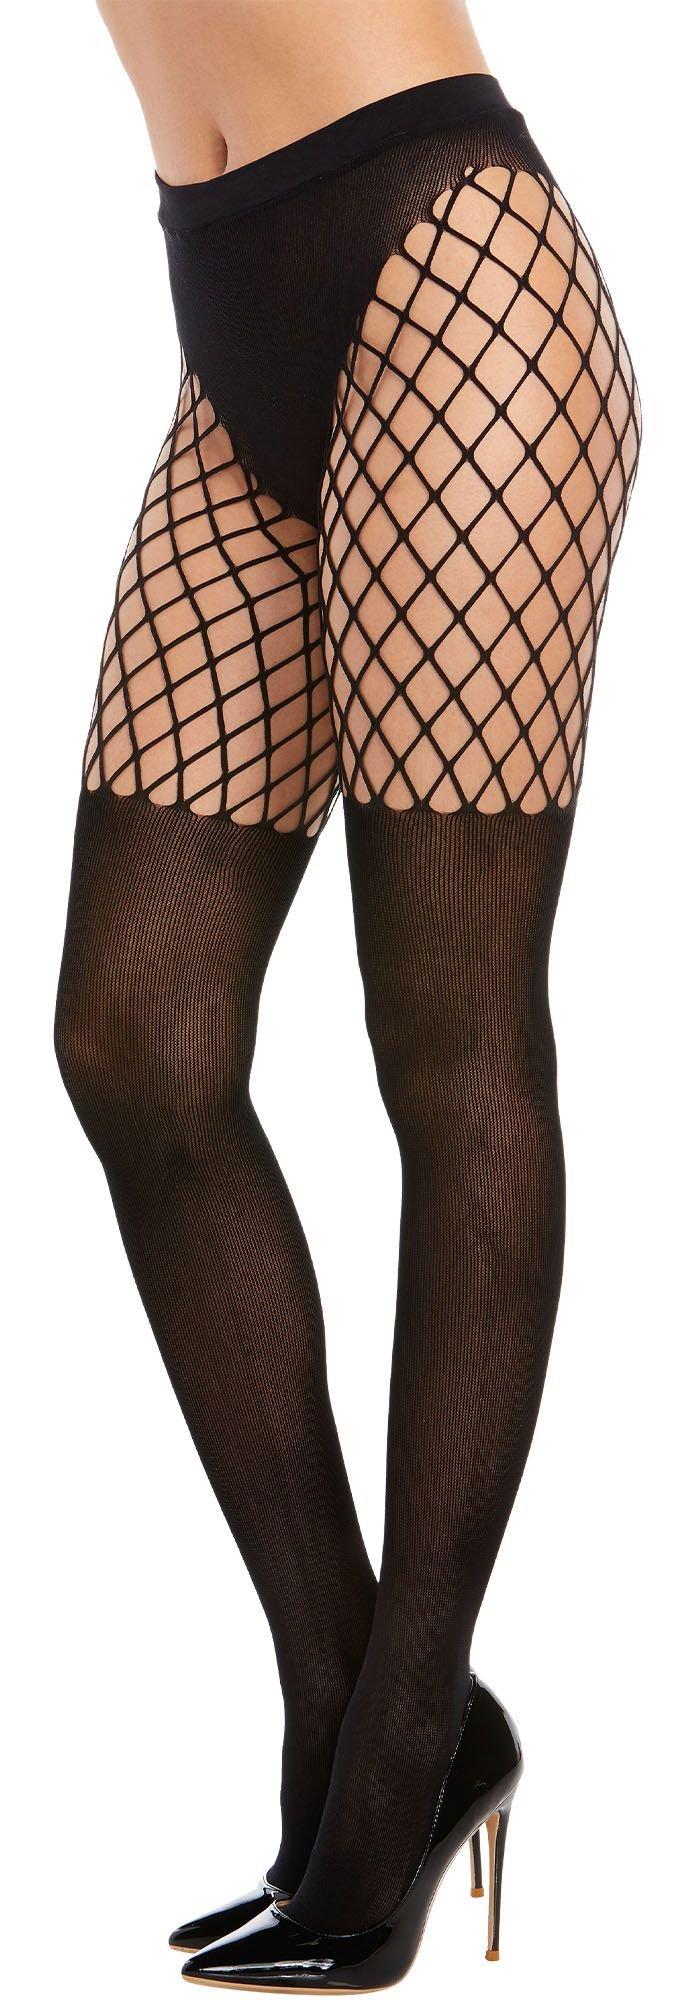 Black Women's Fishnet Tights Sexy Fishnets for Dance Party/Halloween/Cosplay